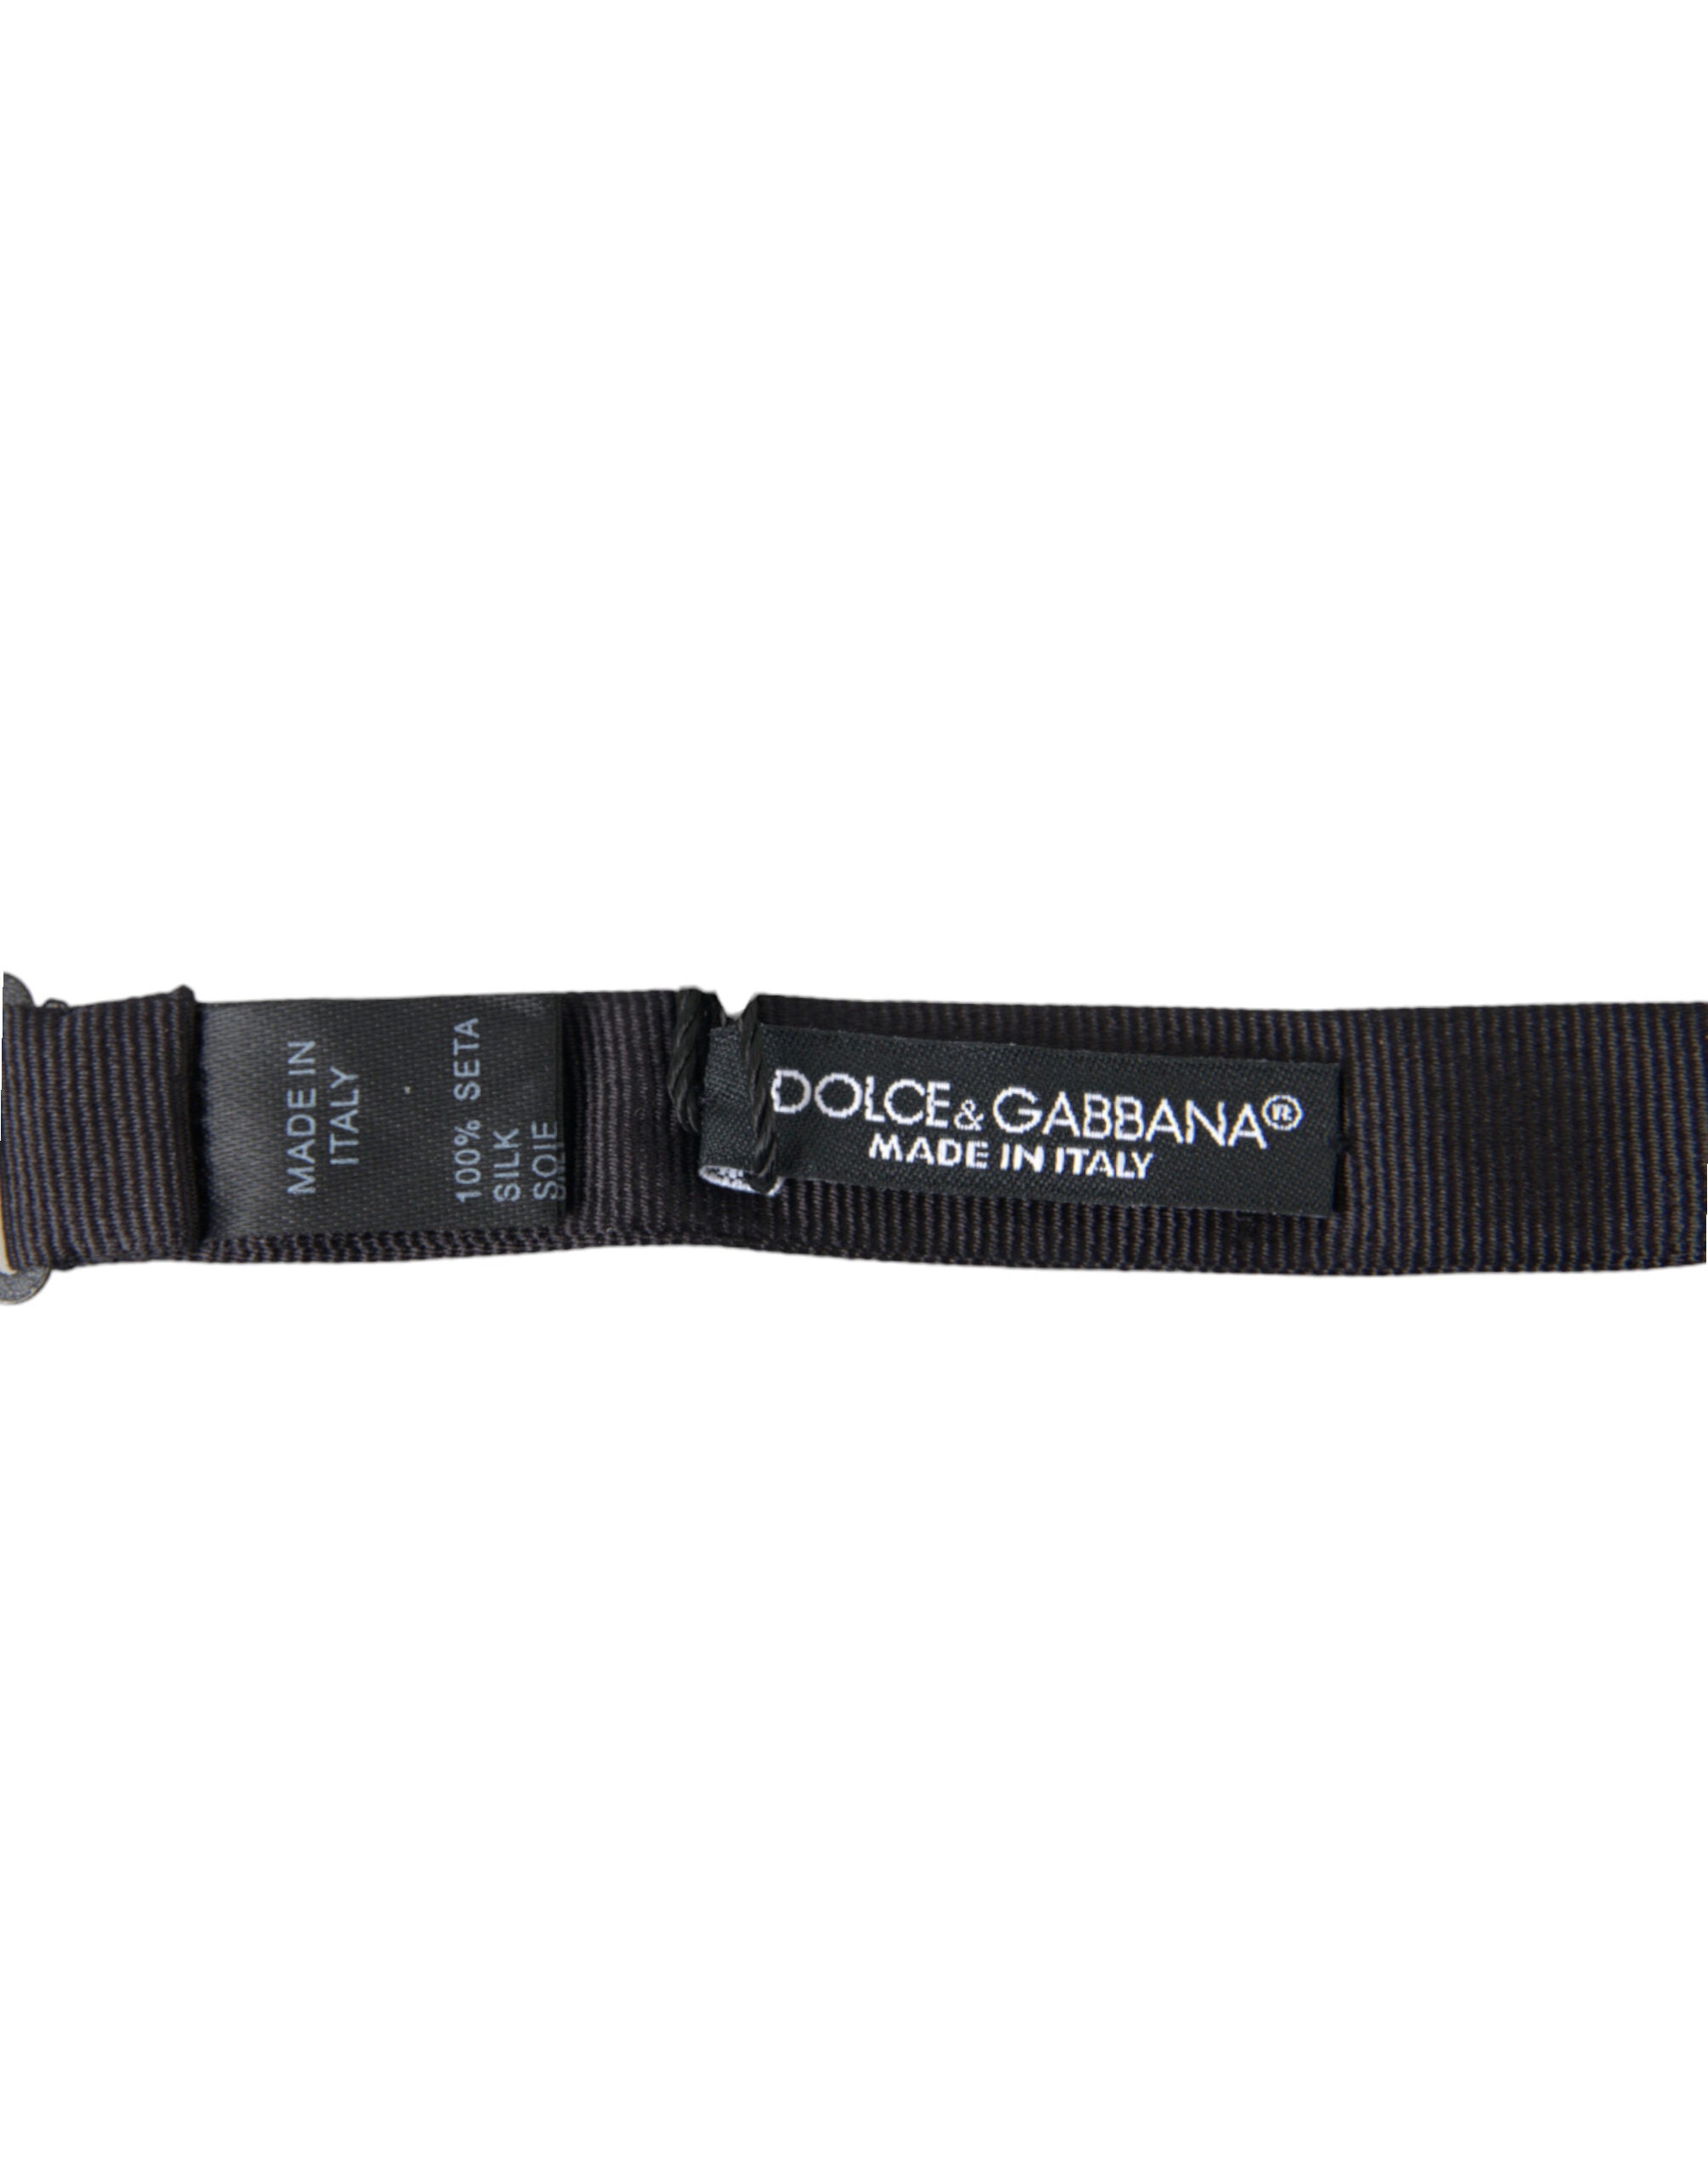 Dolce & Gabbana Elegant Silk Black Bow Tie for Sophisticated Style